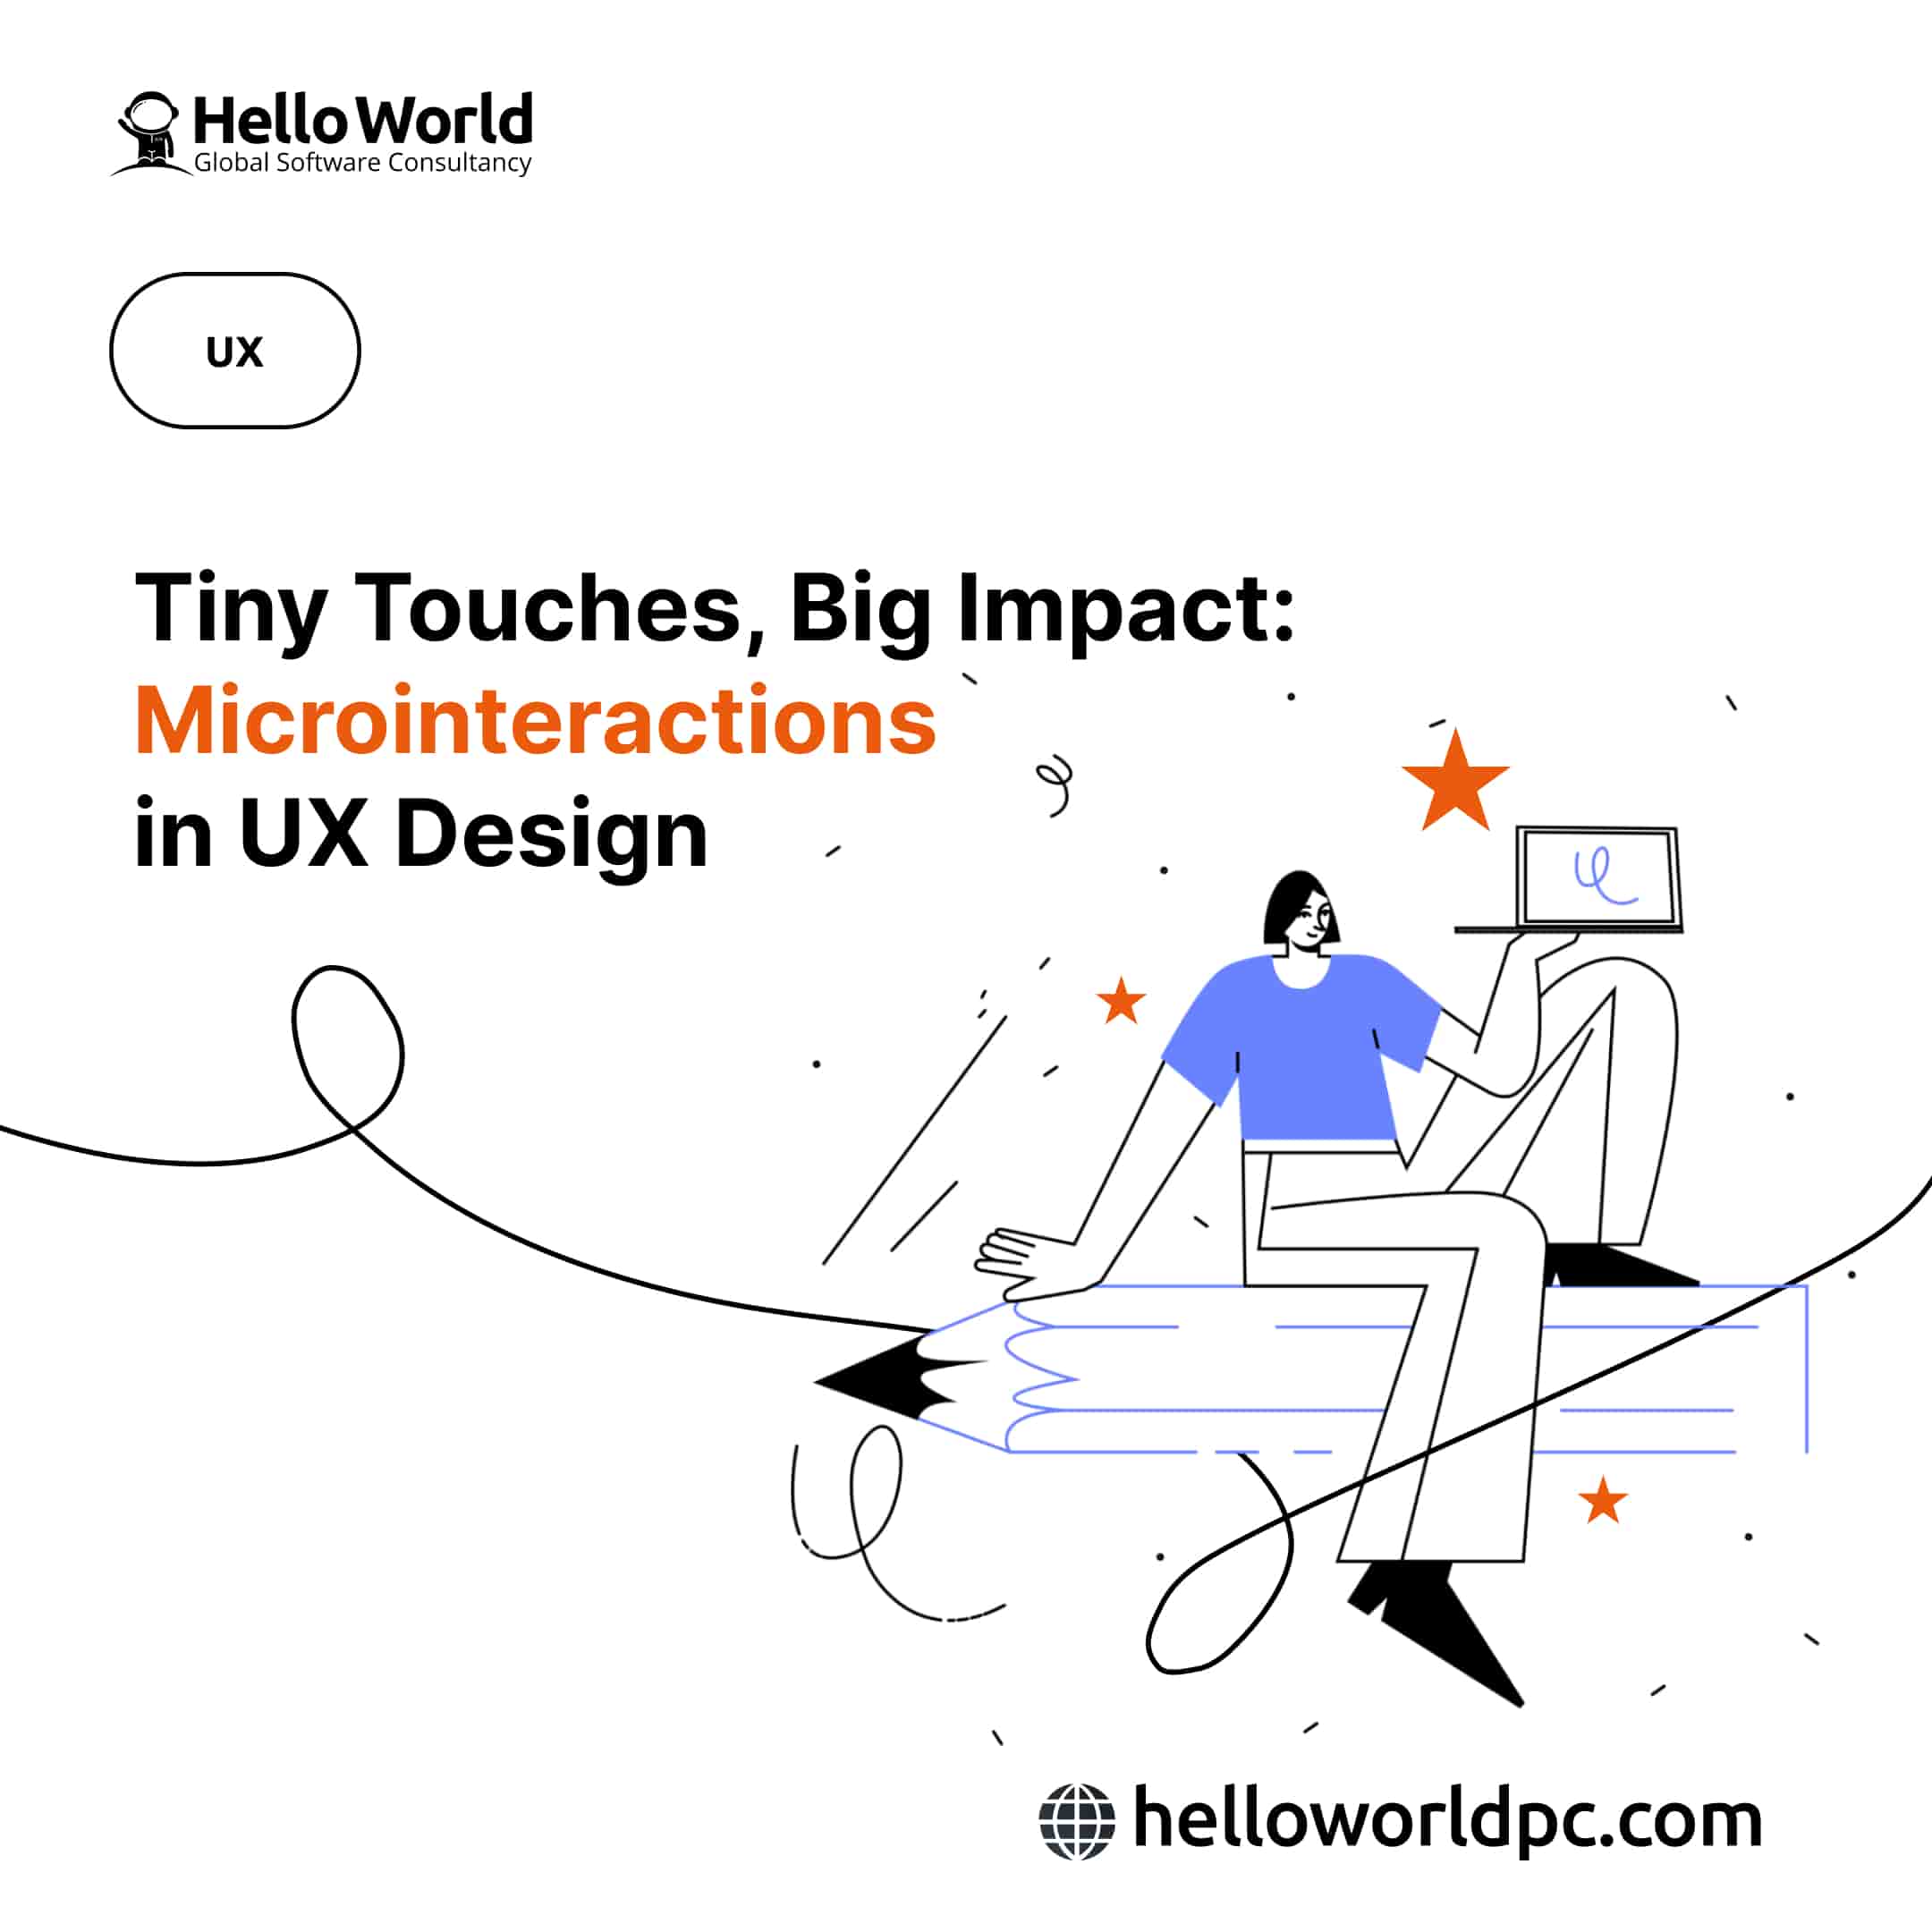 Tiny Touches, Big Impact: Microinteractions in UX Design